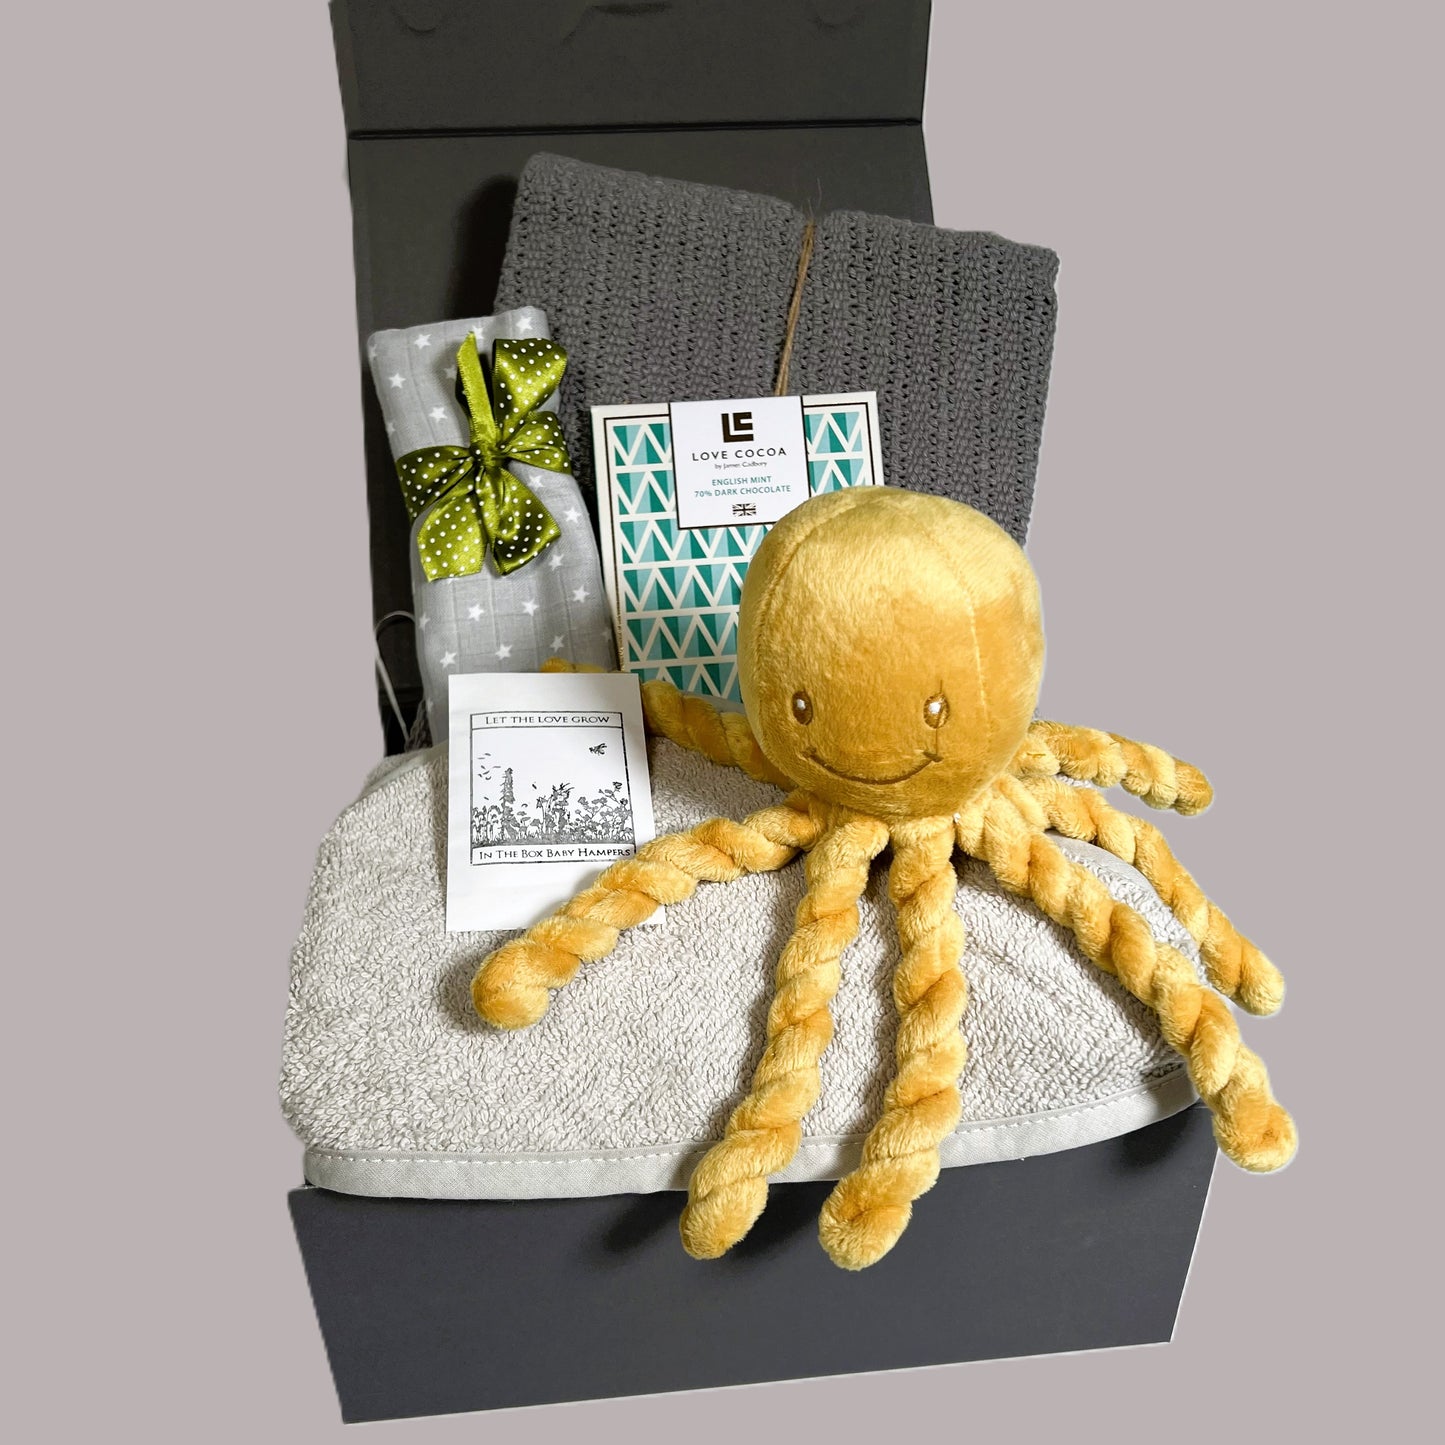 Neutral newborn baby gift hamper containing a Puipui octopus soft baby toy, a cotton cellular baby blanket, a grey cotton hooded baby towel, a bar of Love Cocoa chocolate and a grey muslin square.